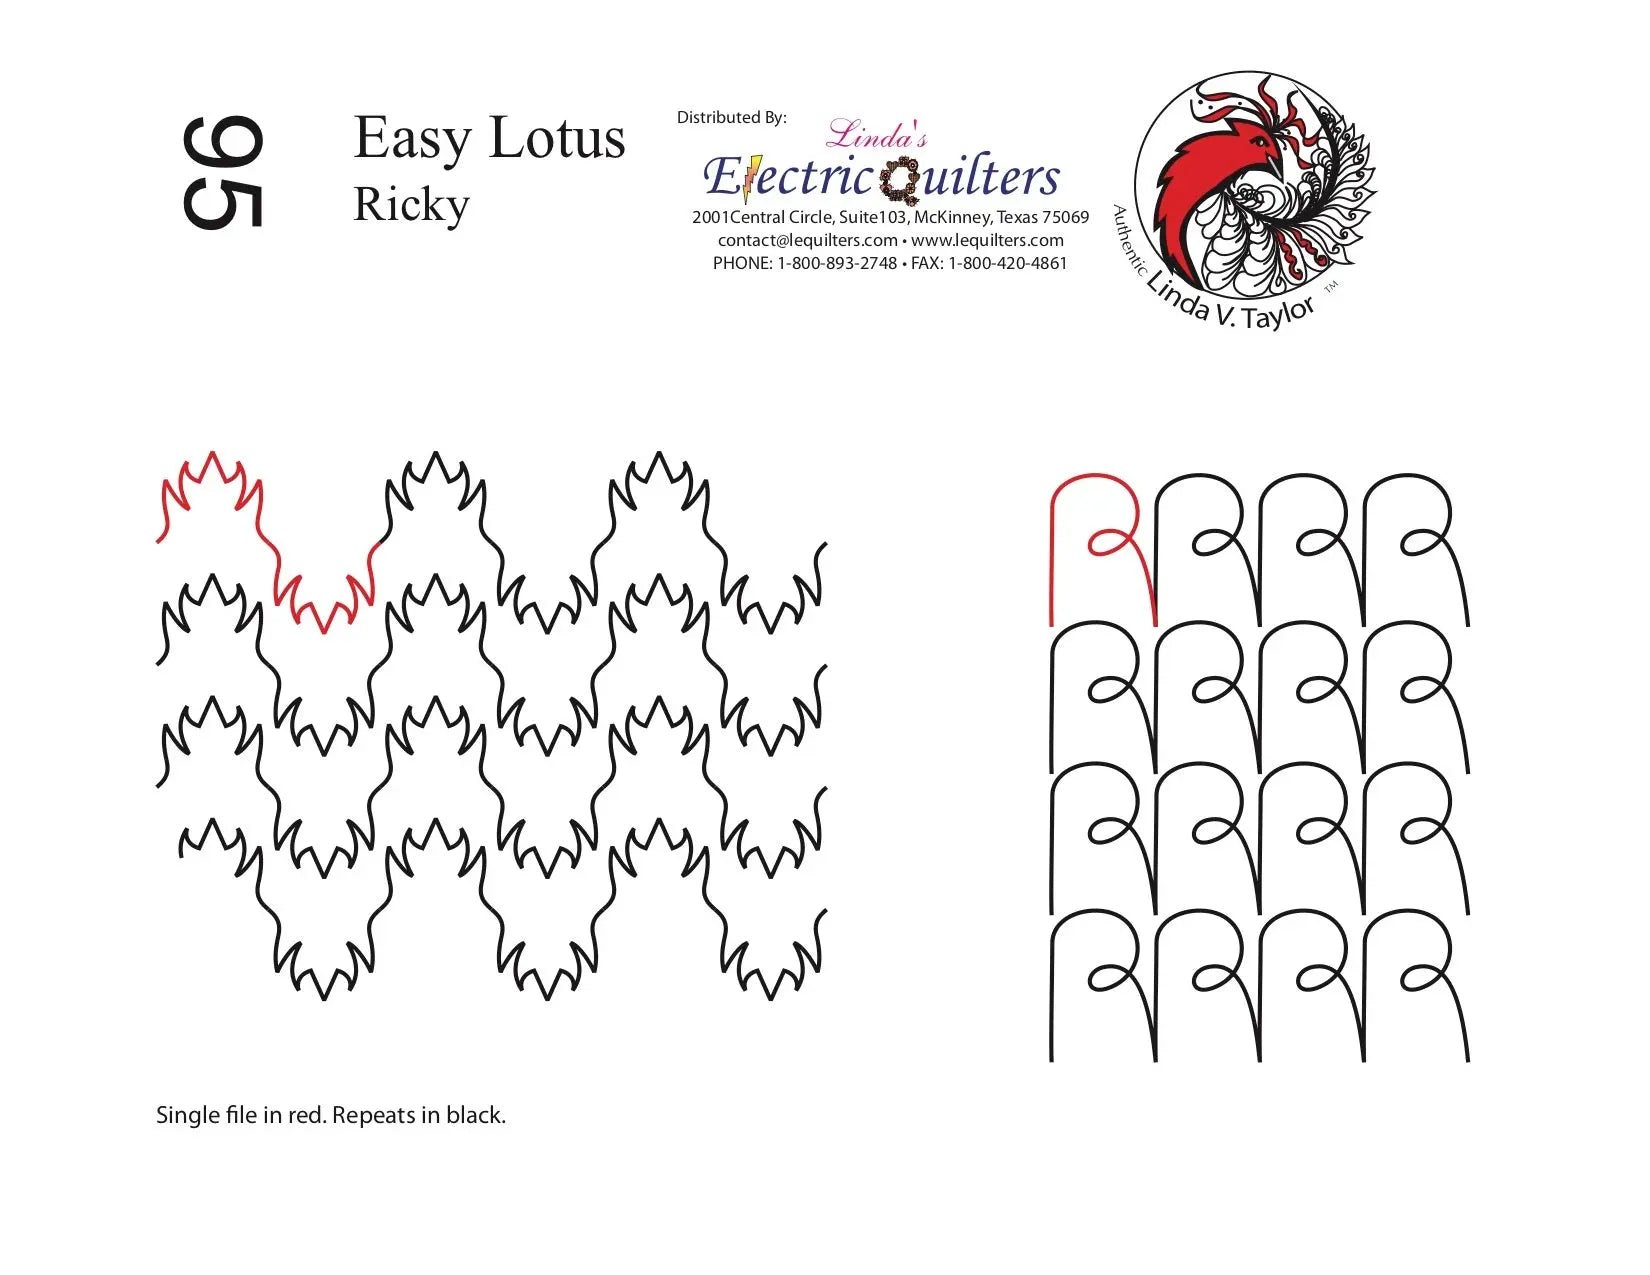 095 Easy Lotus/Ricky Pantograph by Linda V. Taylor - Linda's Electric Quilters